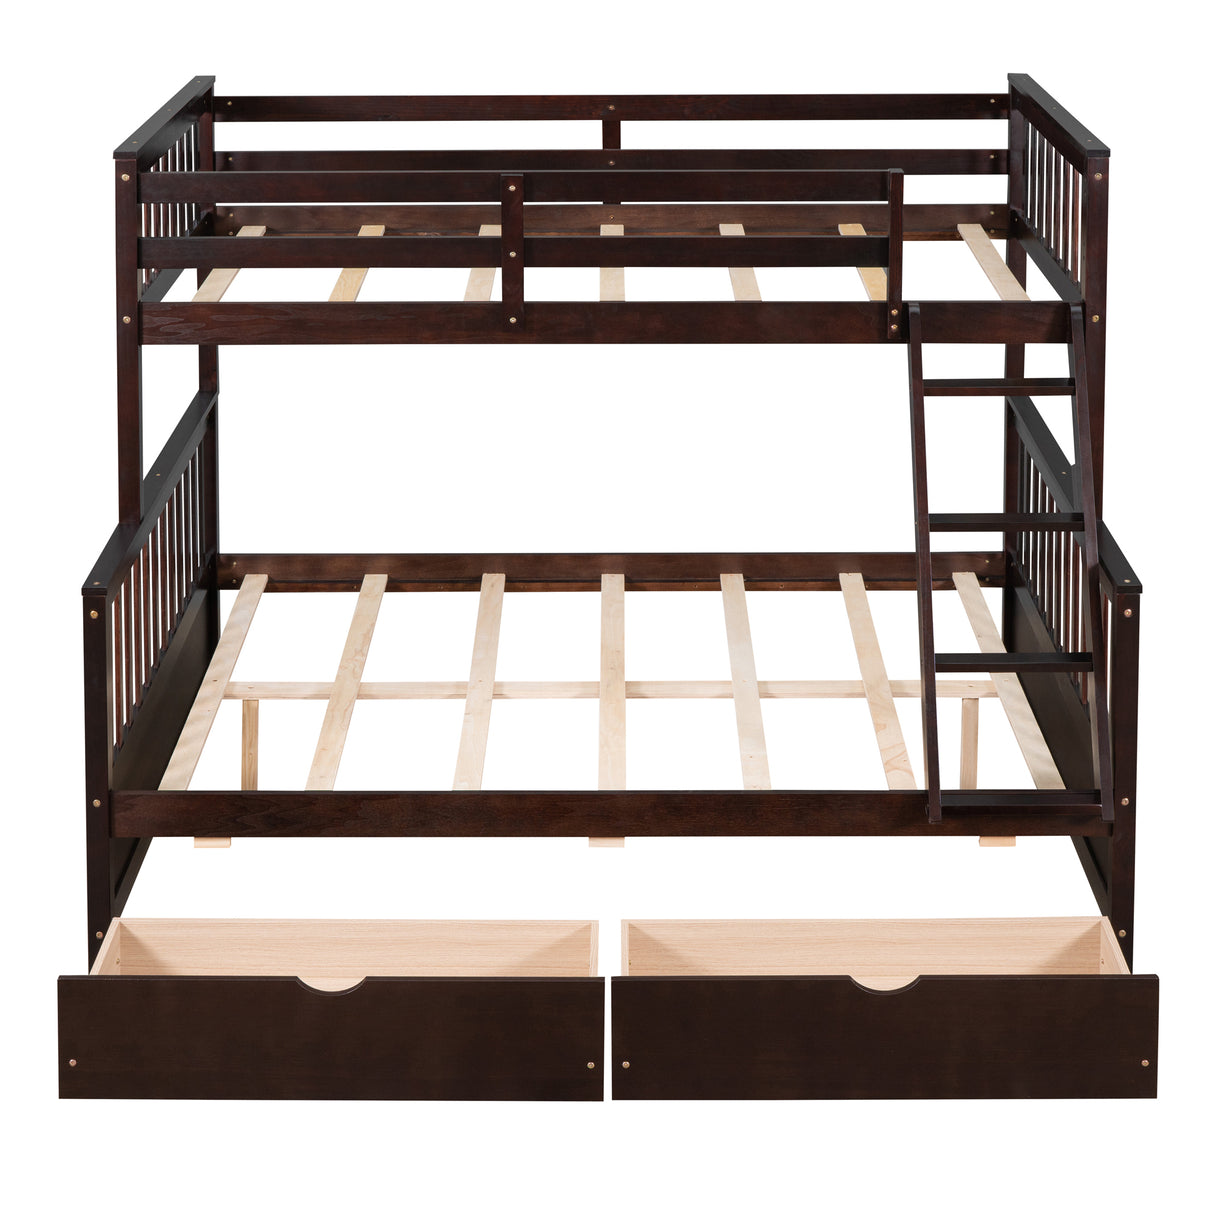 Twin-Over-Full Bunk Bed with Ladders and Two Storage Drawers(Espresso)( old sku:LT000165AAP） - Home Elegance USA